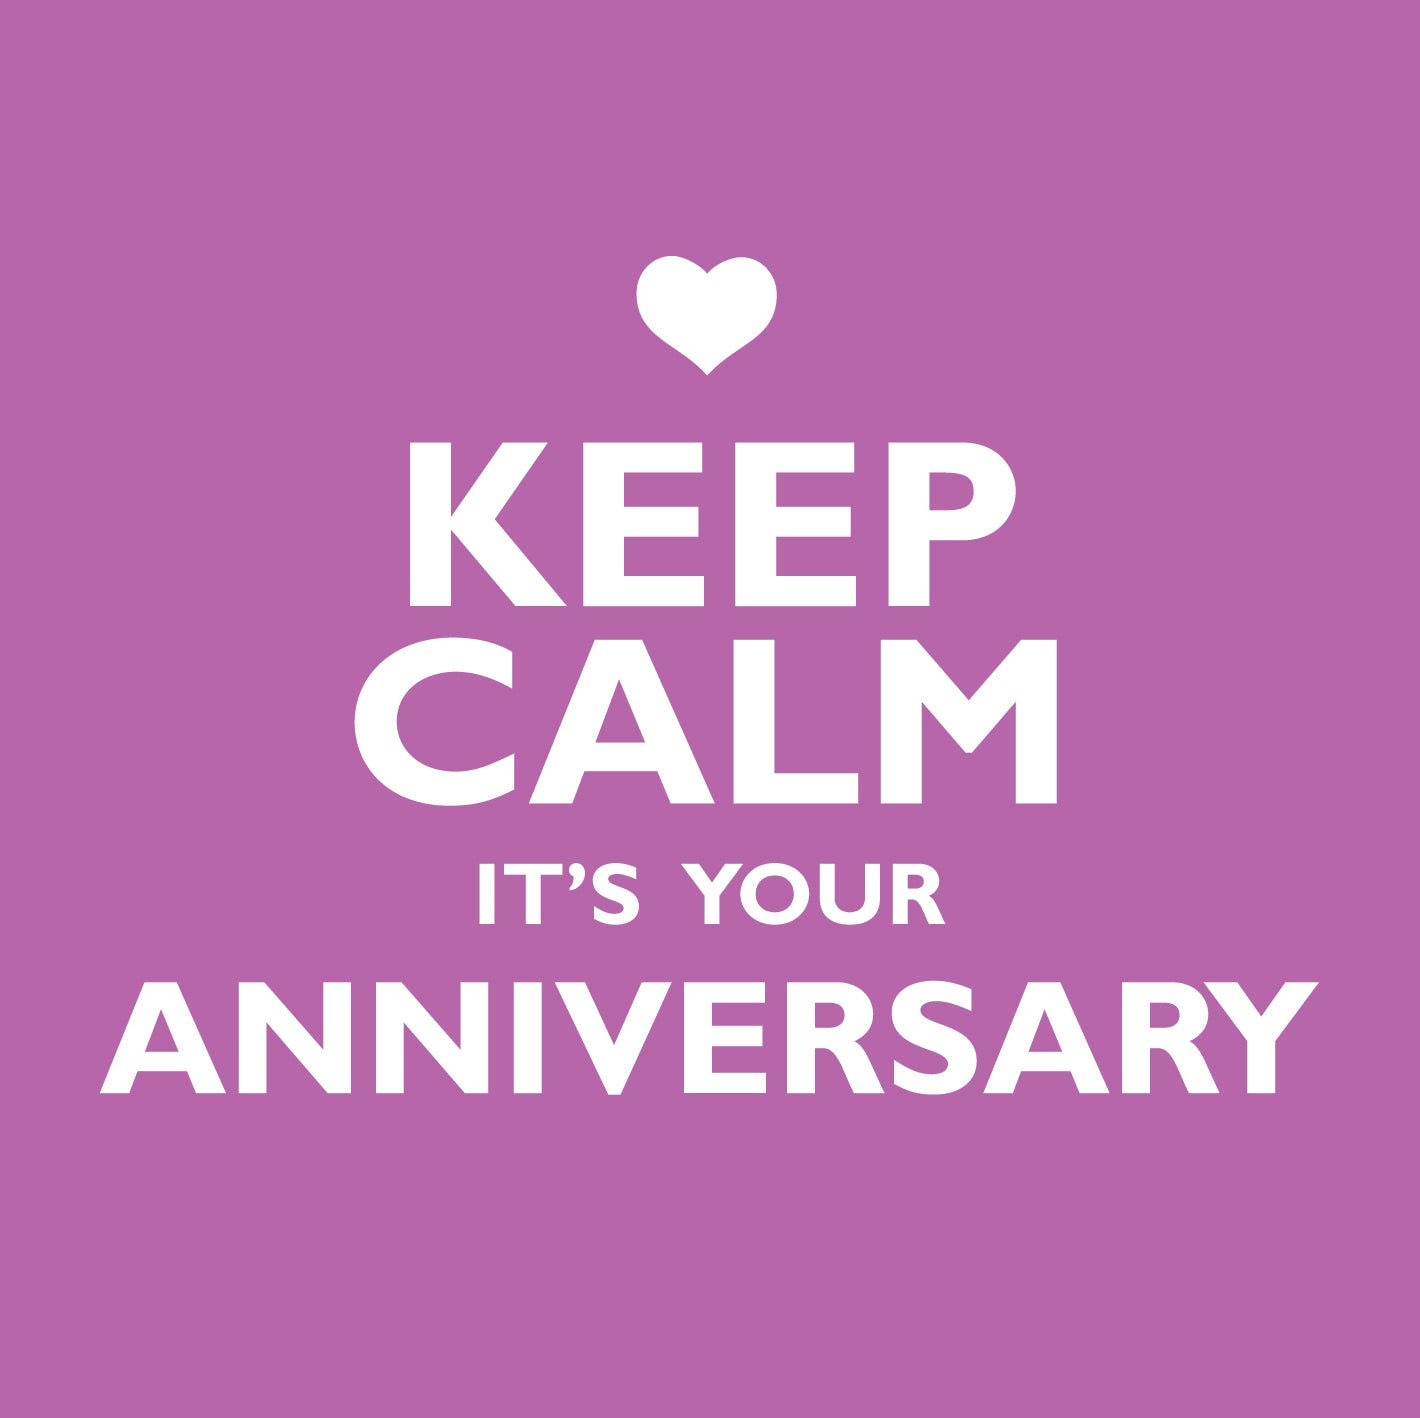 Keep Calm It's Your AnniversaryKeep Calm It's Your Anniversary